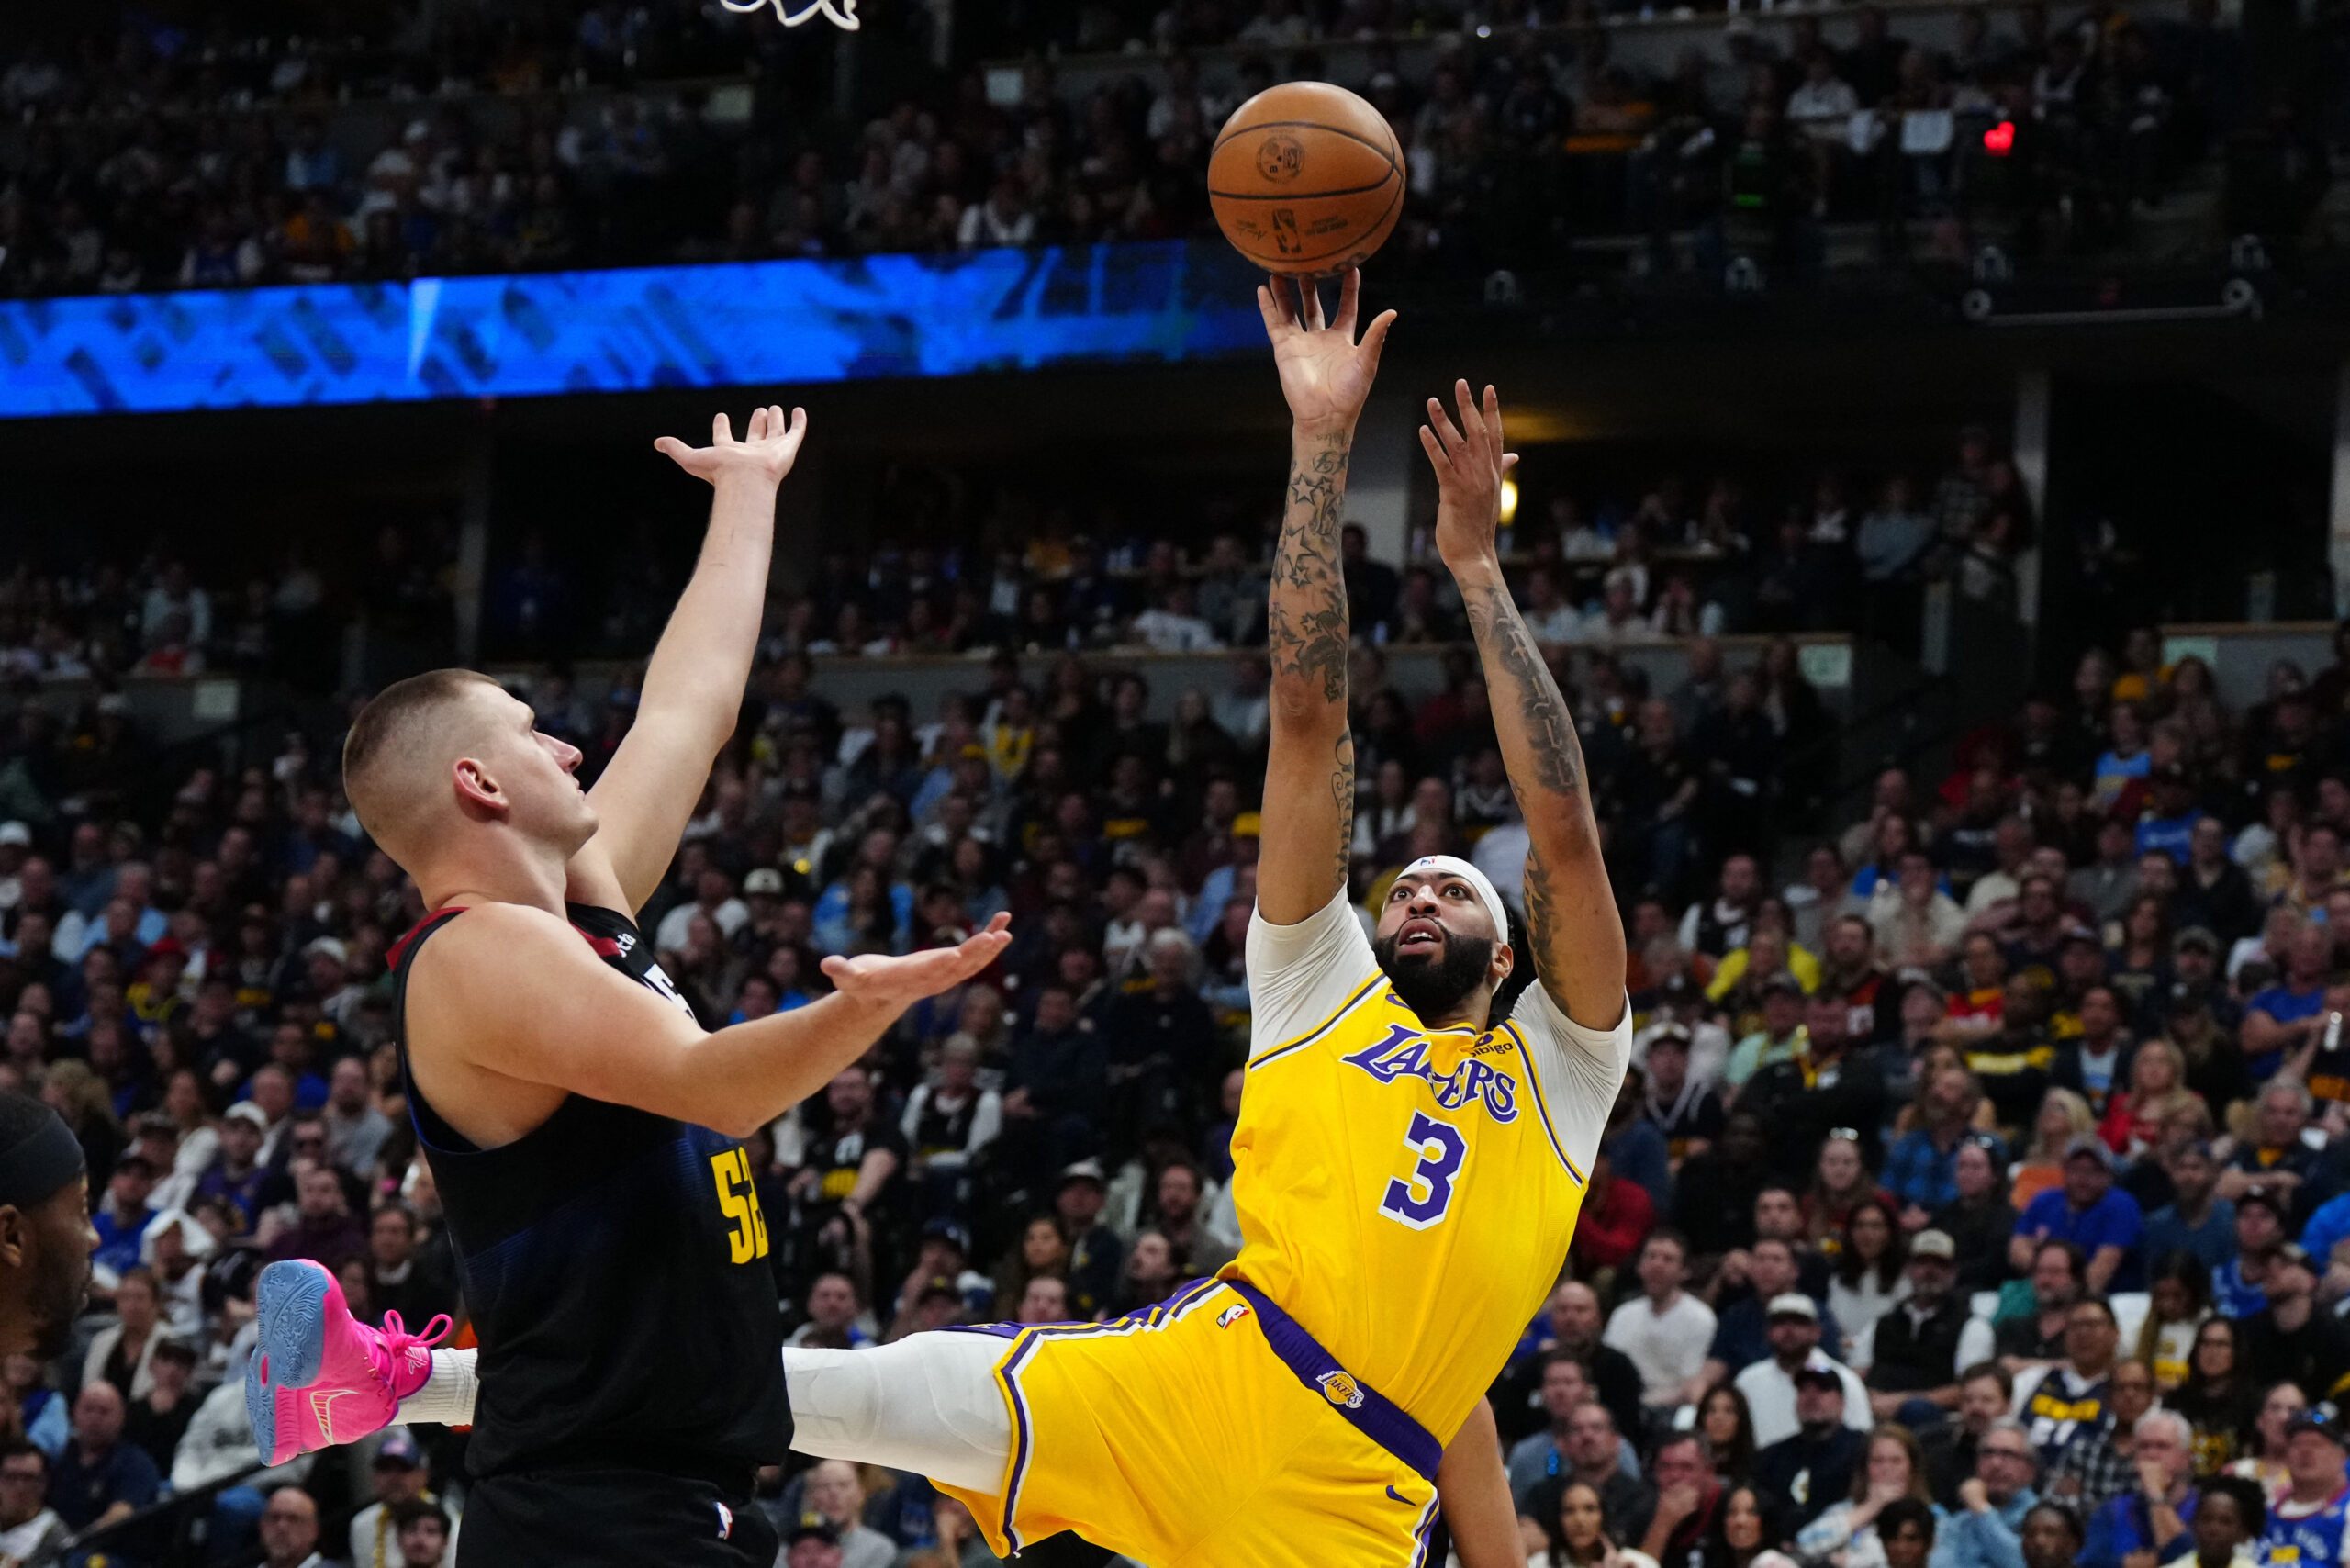 Lakers eager to solve Nuggets in Game 3